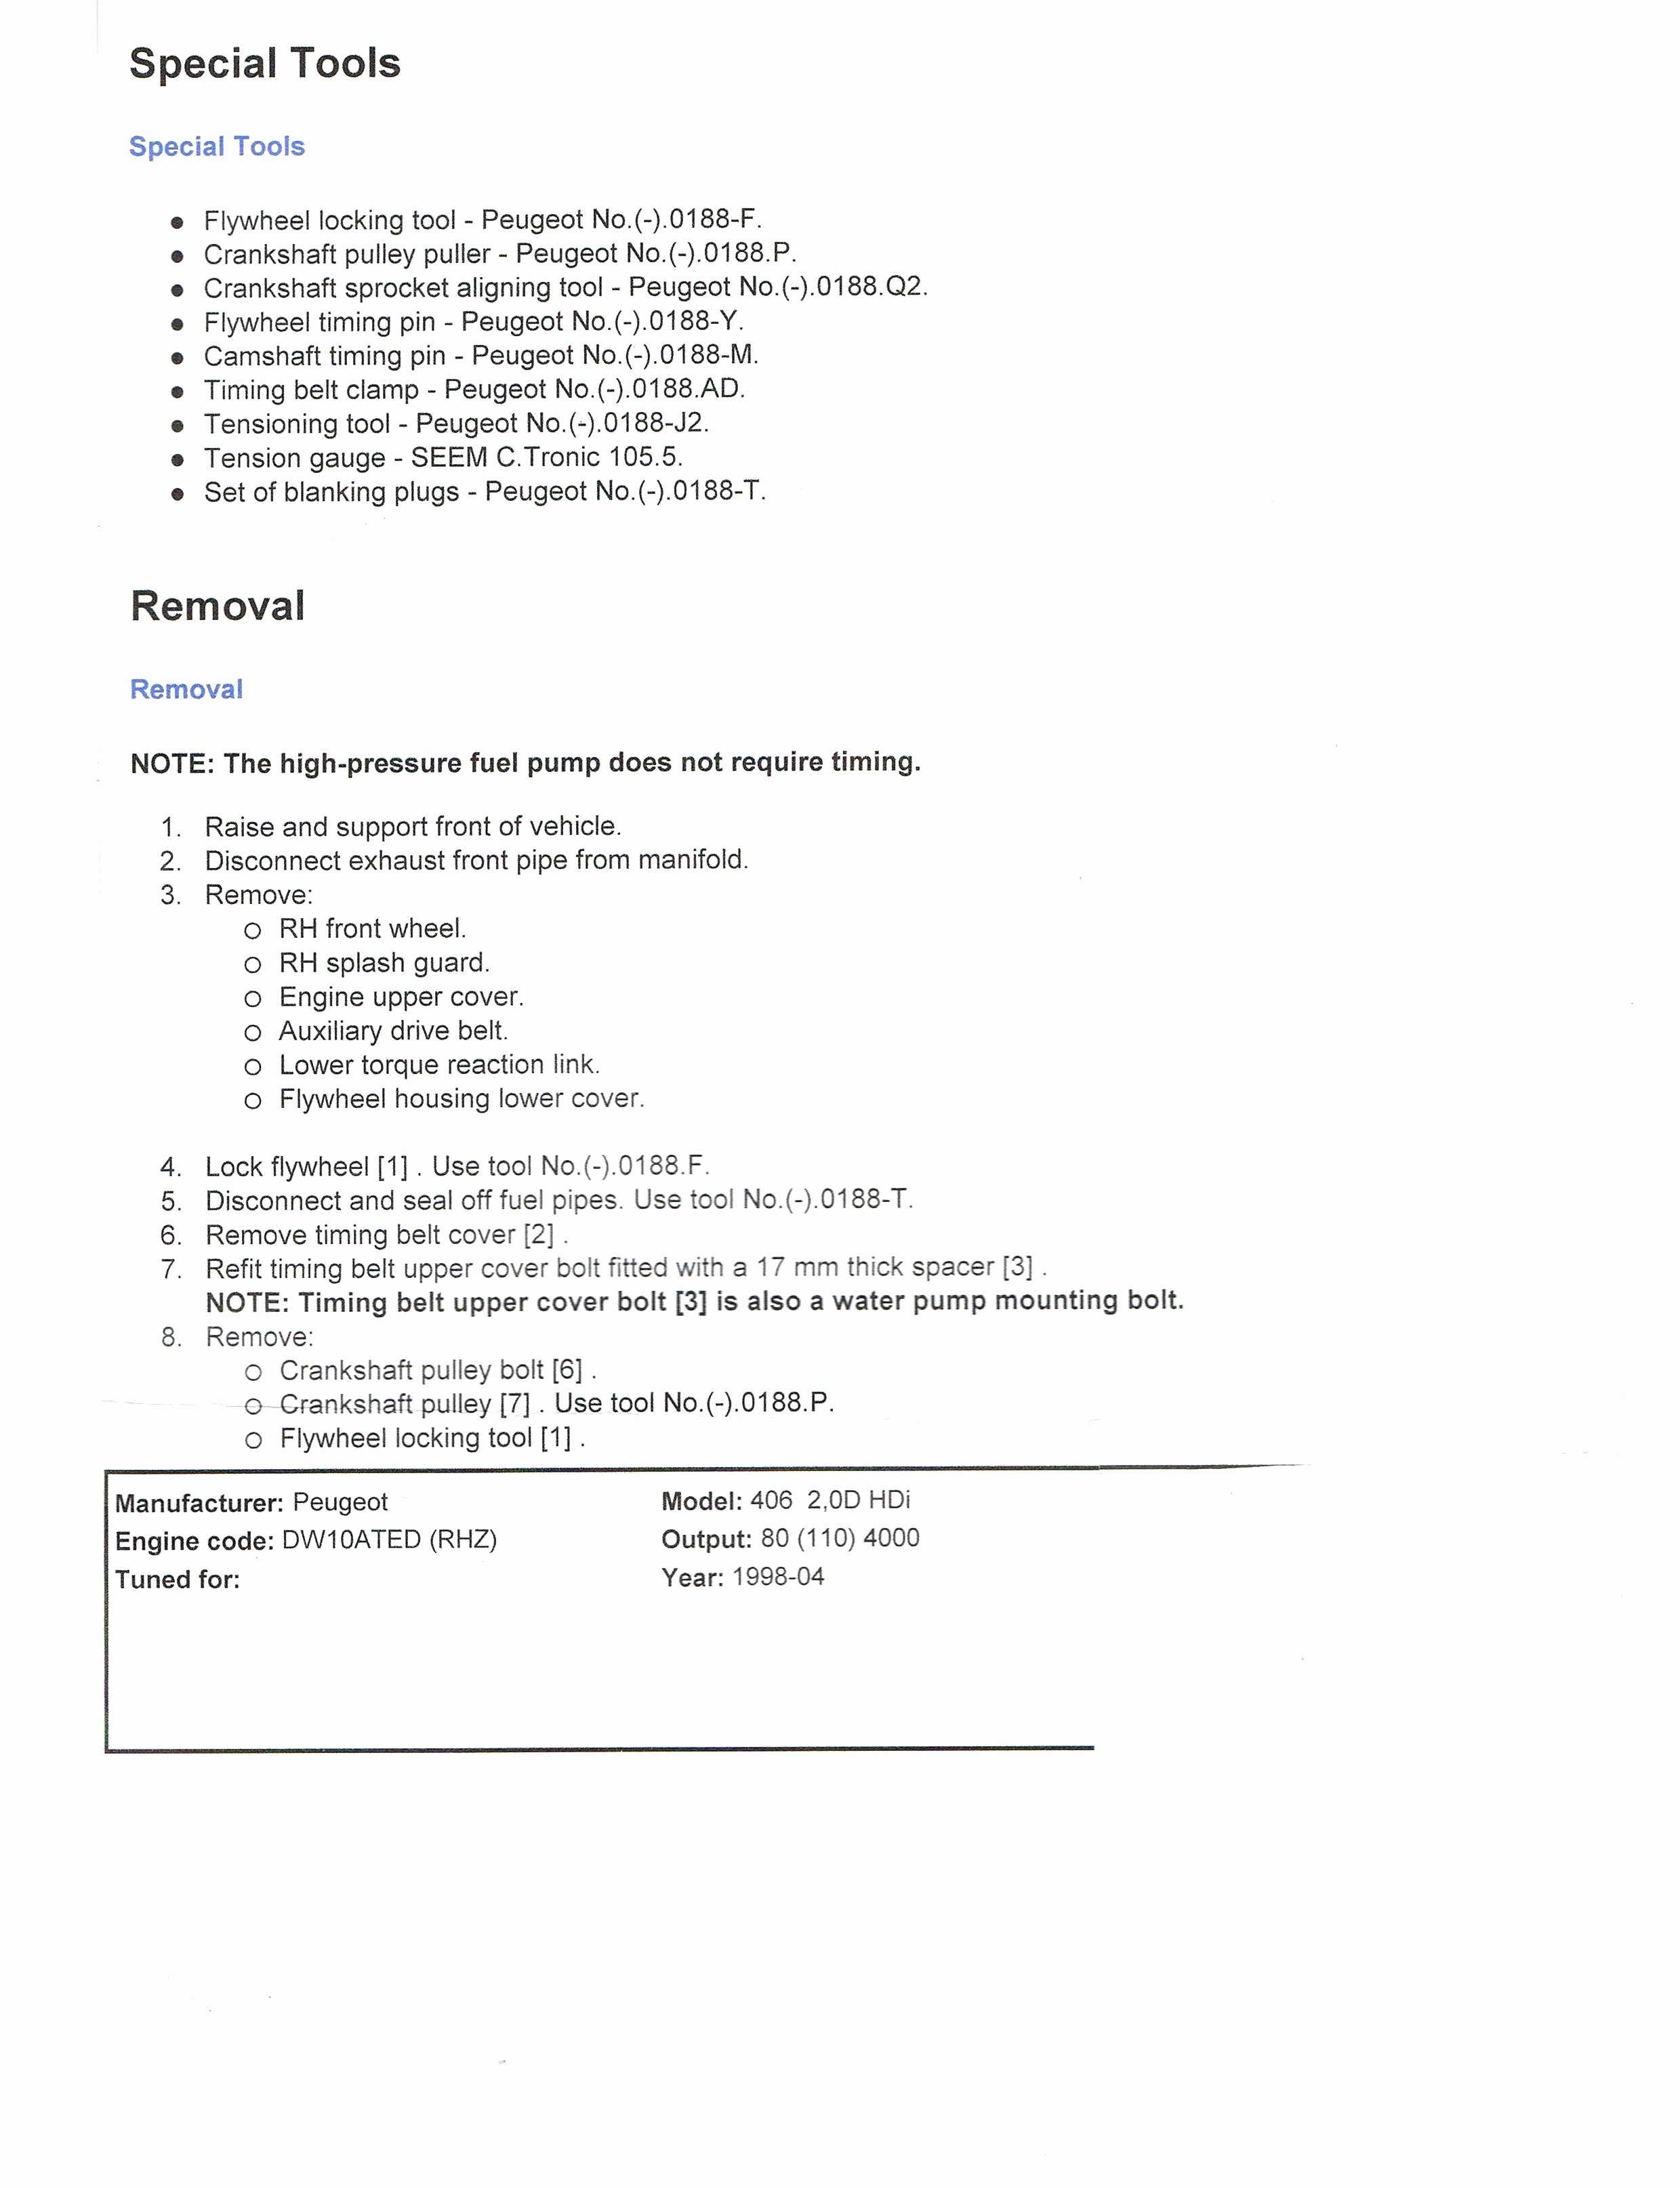 Lesson Plan Template Google Docs Awesome Google Docs Lesson Plan Template Inspirational New Lesson